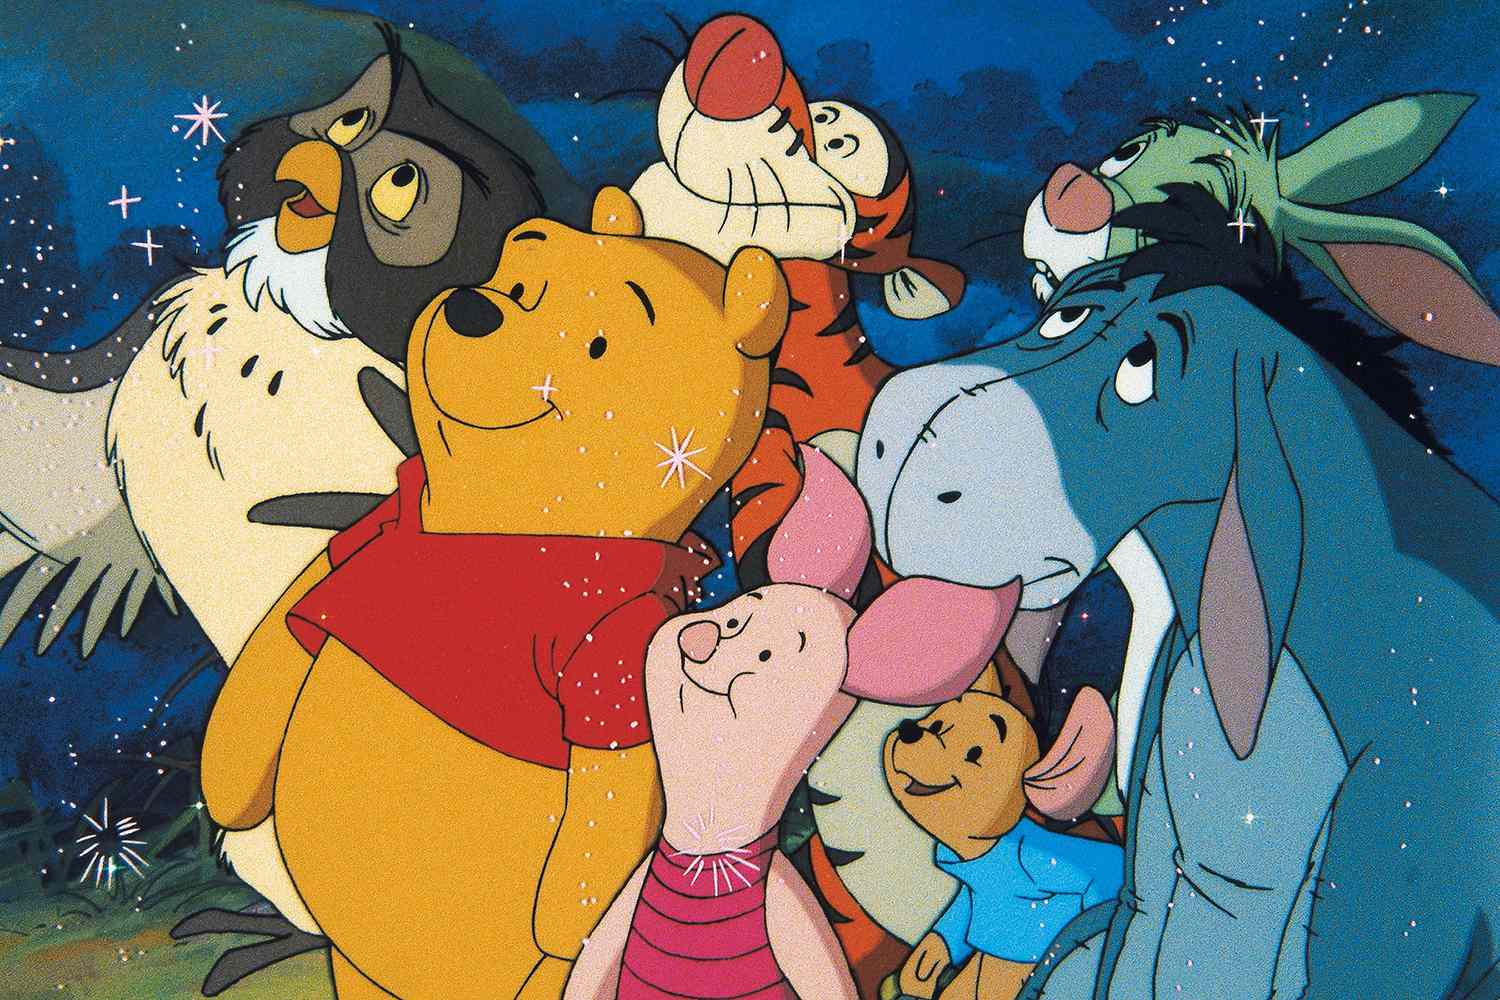 The Whimsical World of Winnie the Pooh